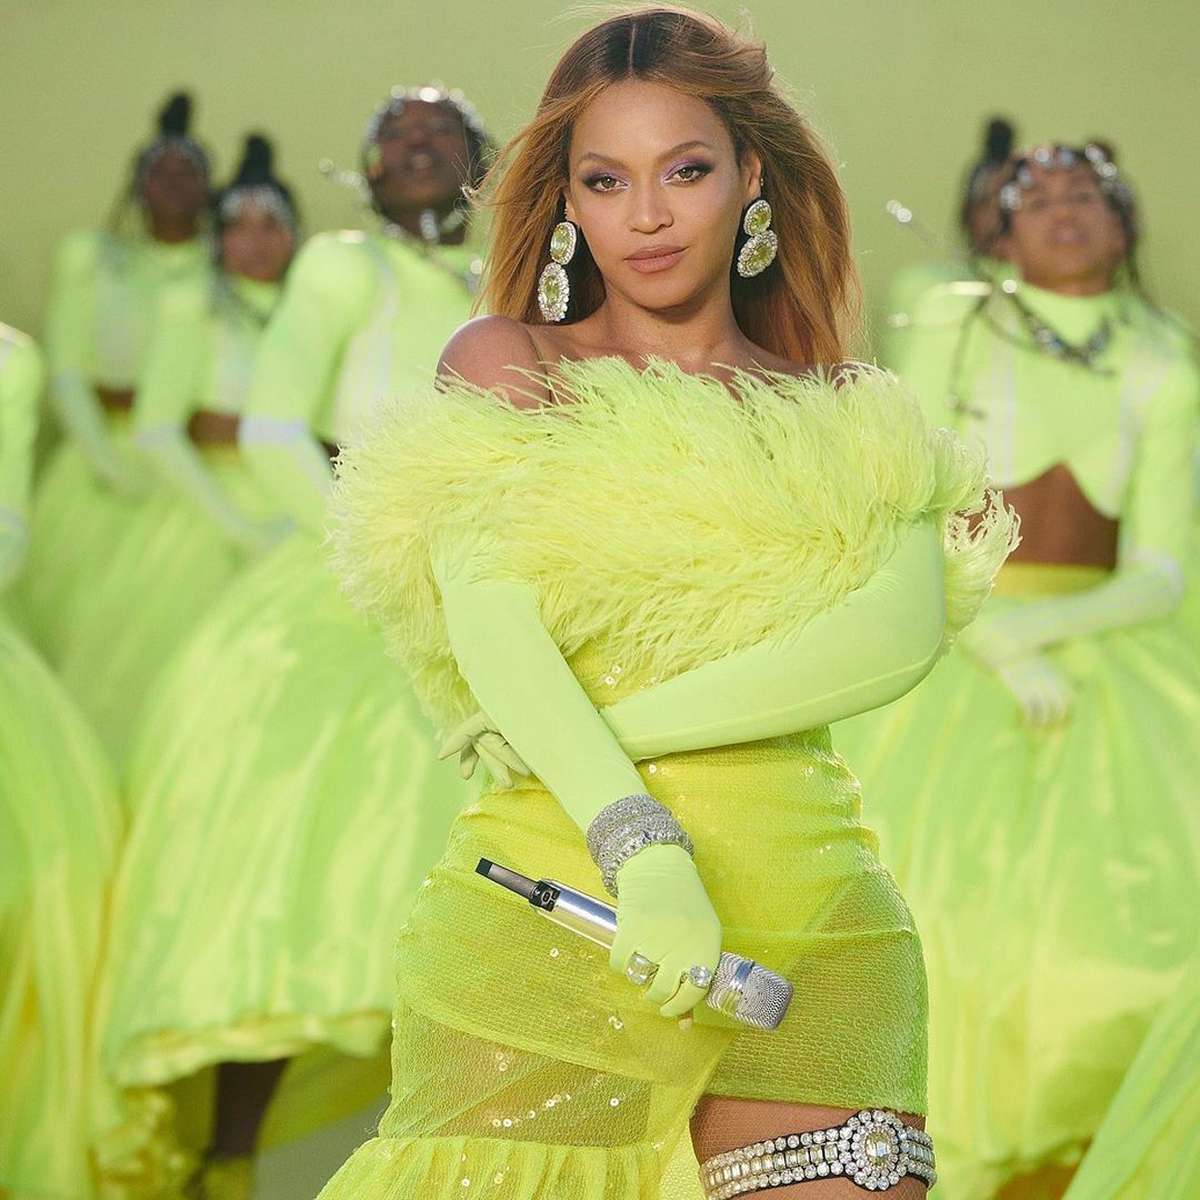 Beyoncé’s Oscars Performance Was Full of Deeper Meaning